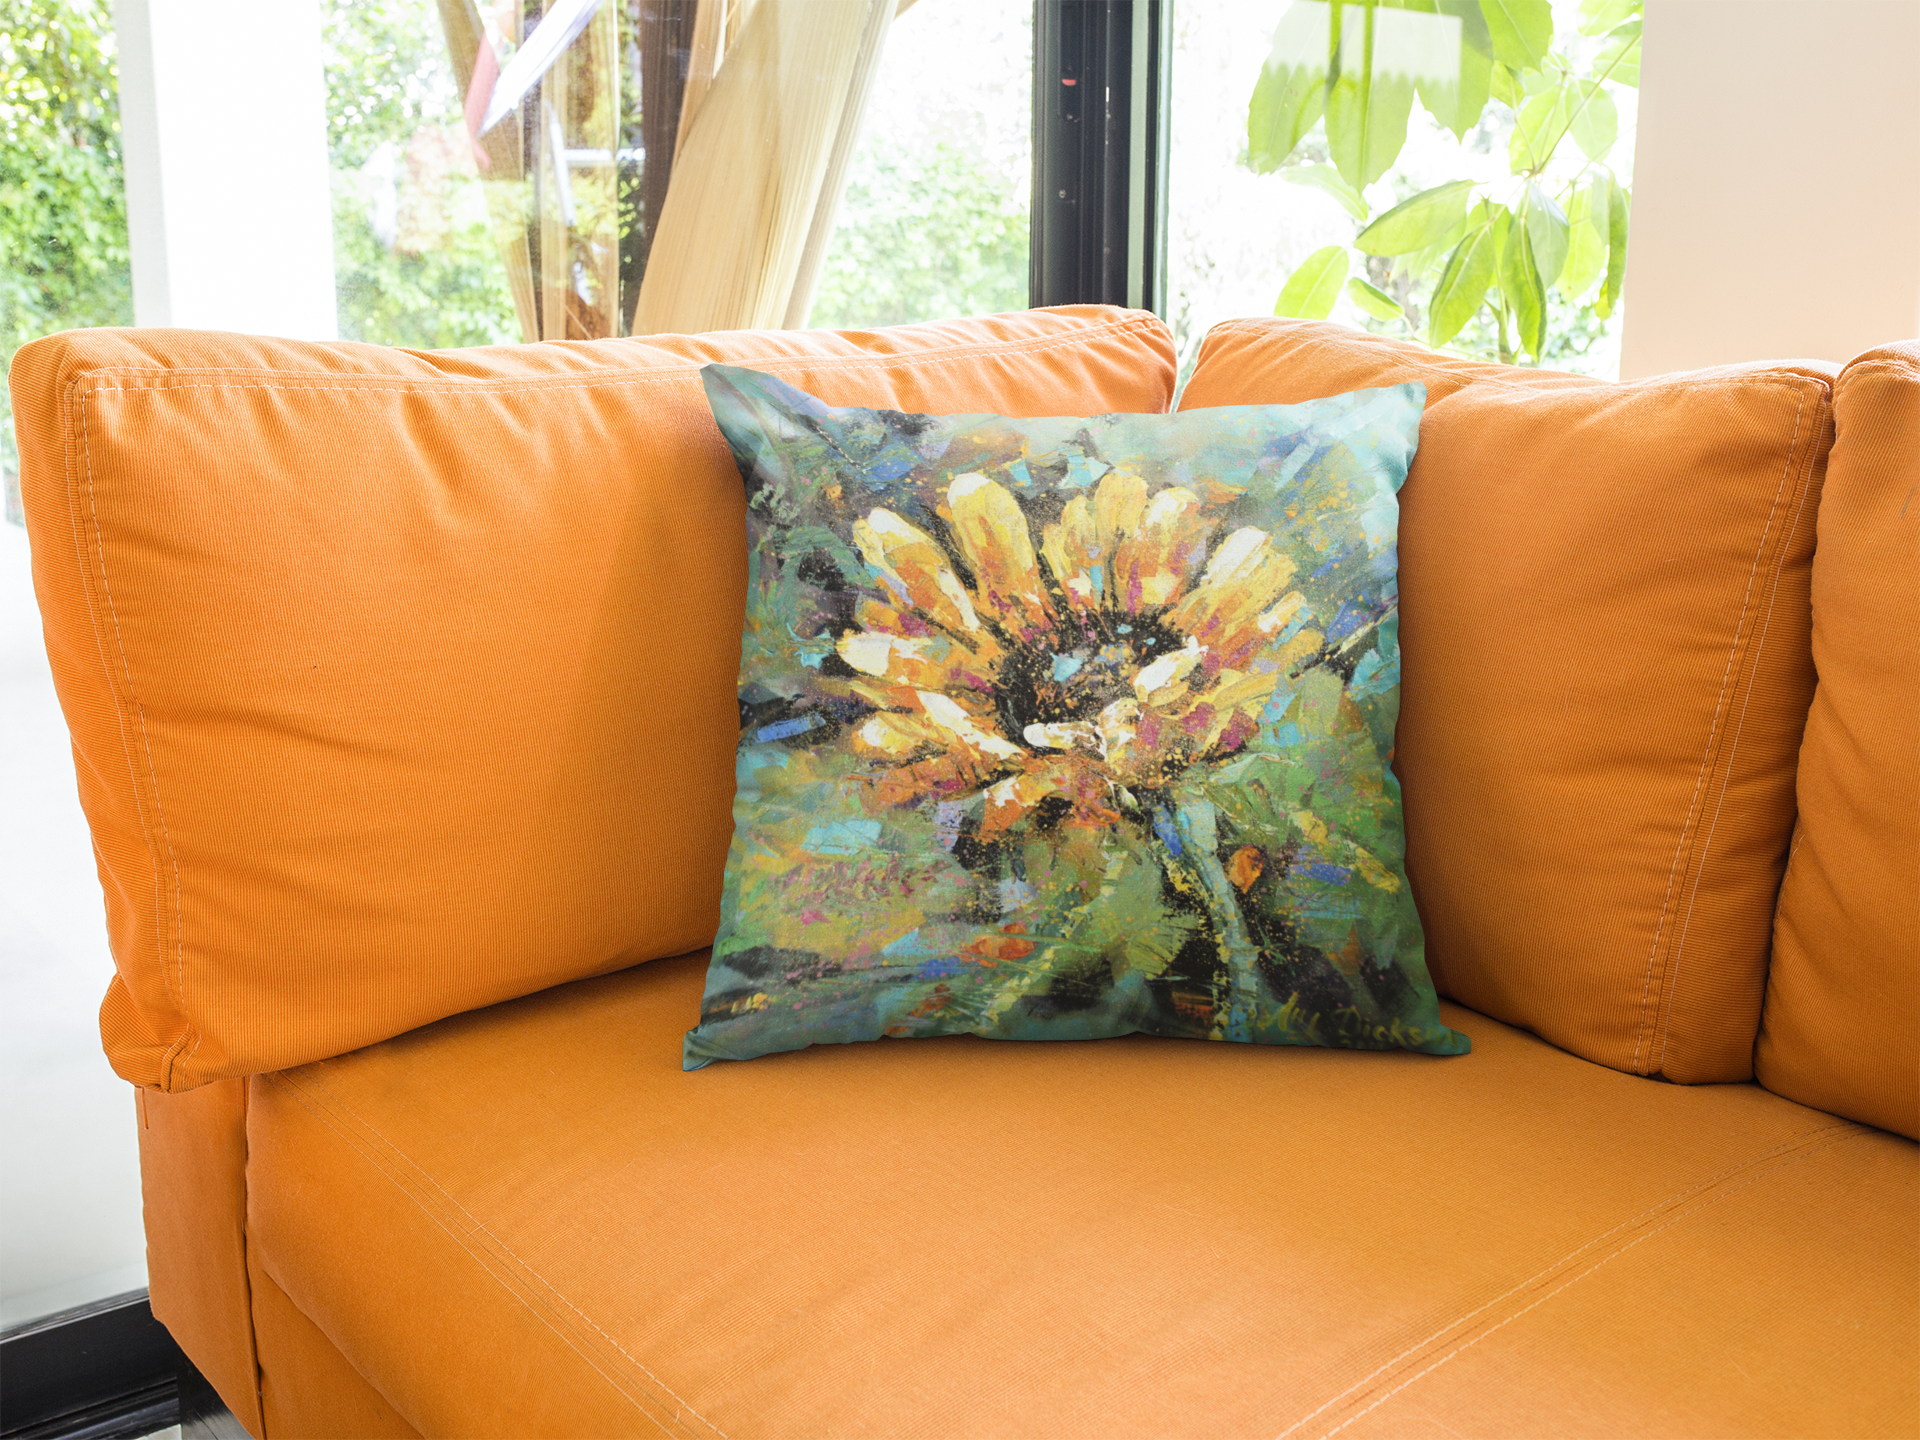 square-pillow-template-lying-on-an-orange-sofa-in-a-living-room-a14921 (1).png